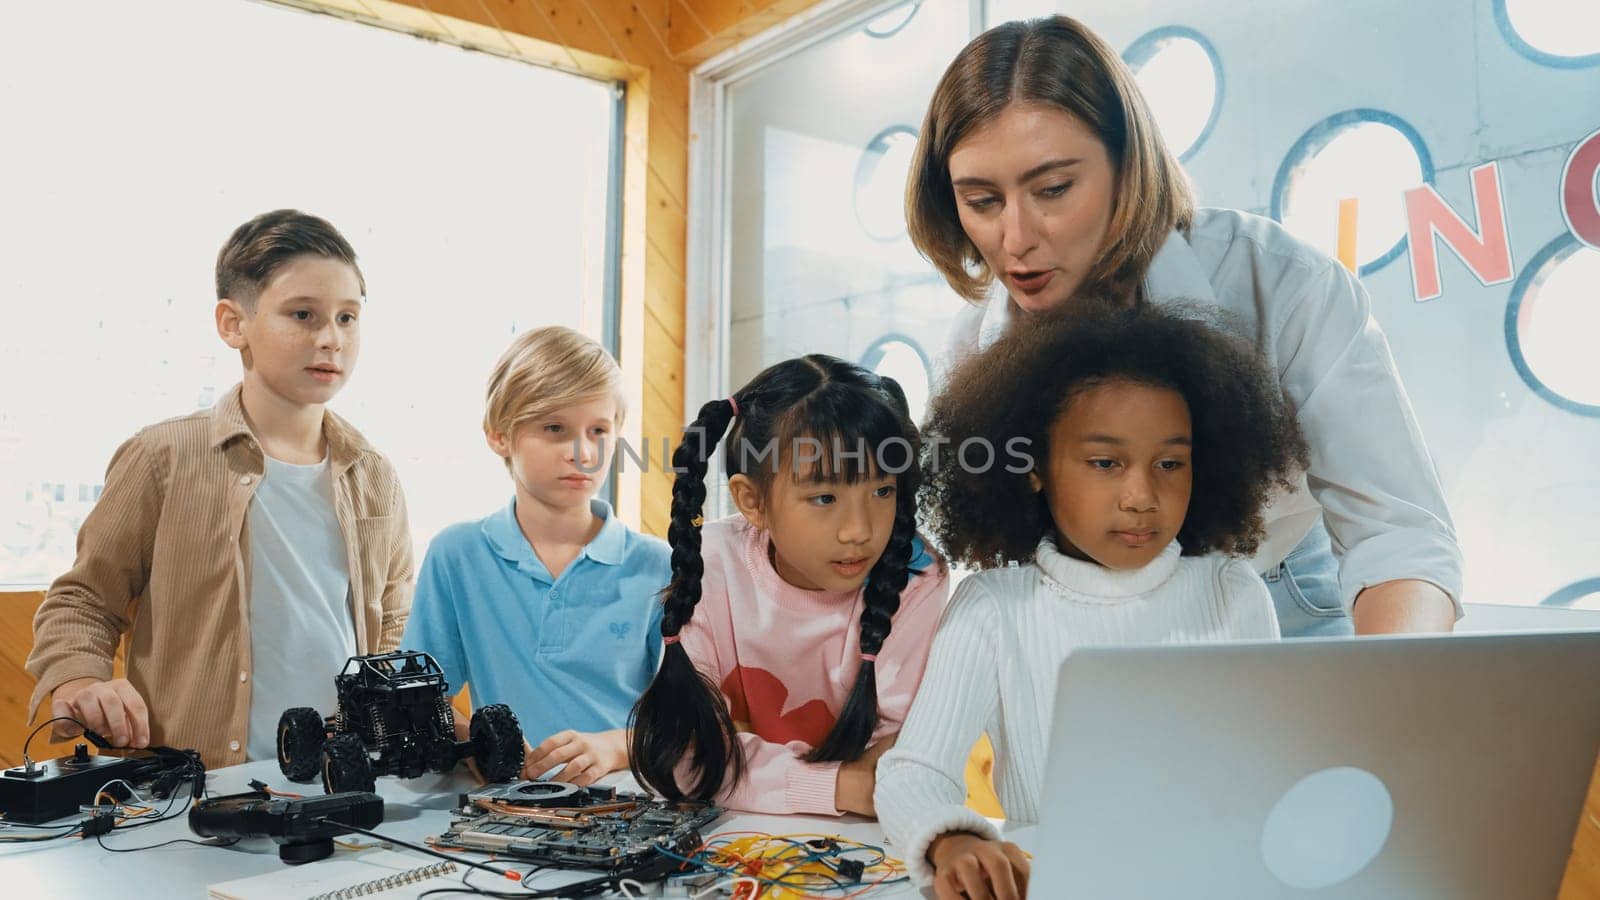 Caucasian teacher praise student while looking at learner work or presentation. Group of diverse student looking at presentation and fixing motherboard at table with chips and wires placed. Erudition.